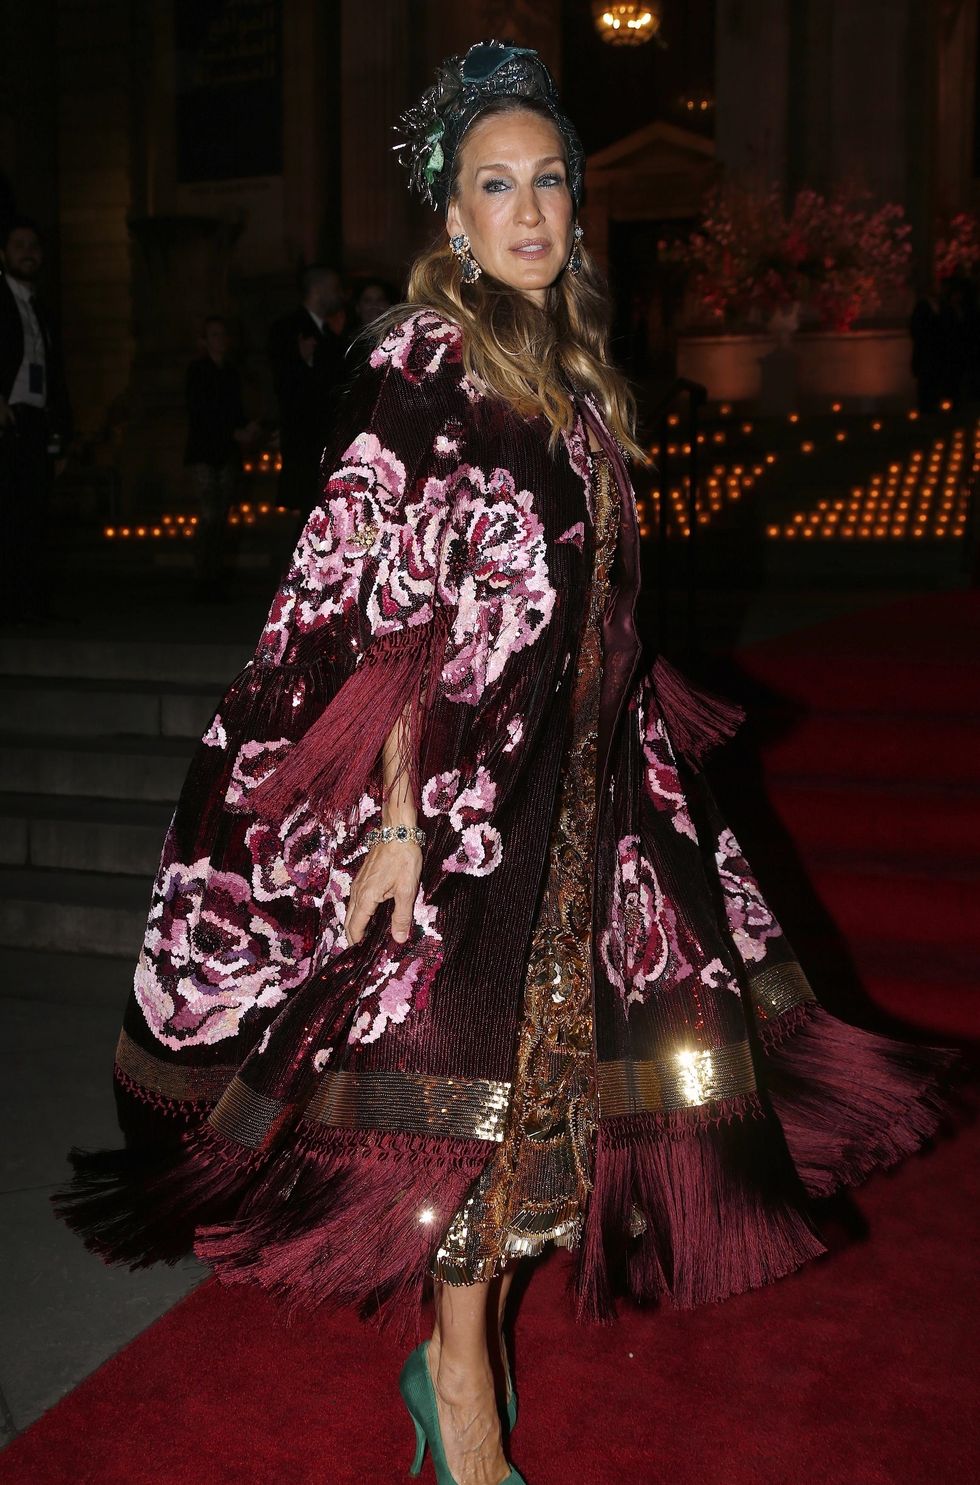 Sarah Jessica Parker Wears a Floral Cape to the Dolce & Gabbana Alta ...